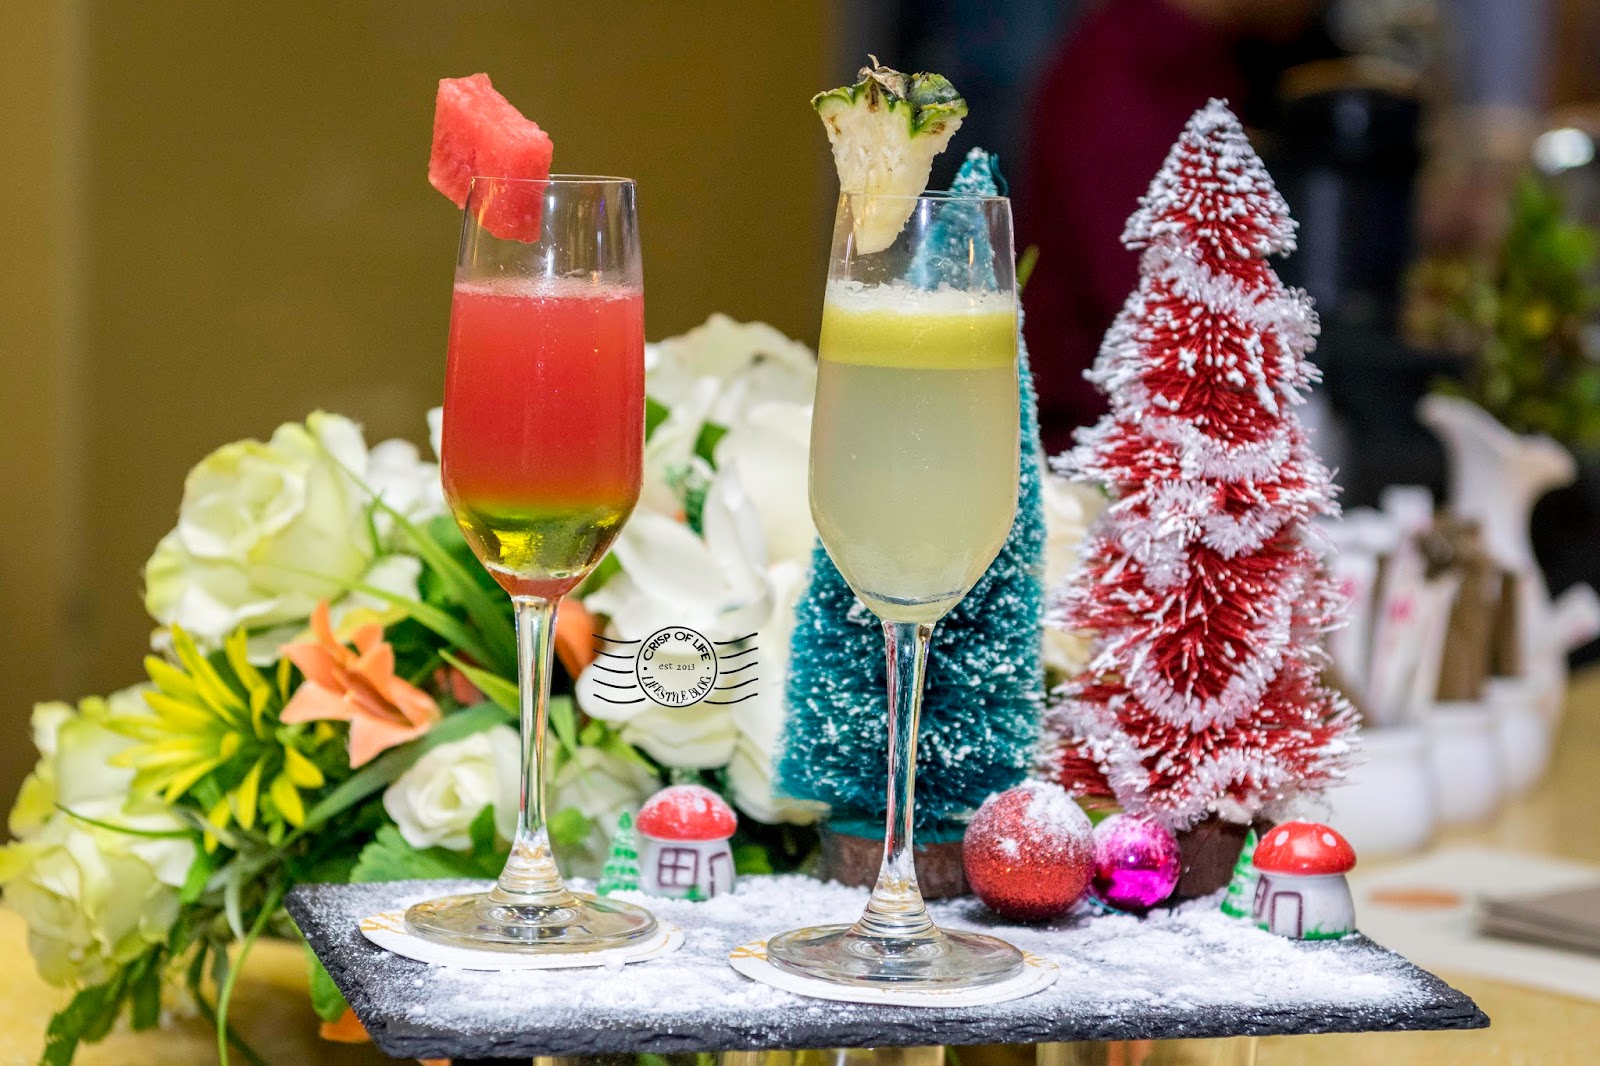 Christmas Eve Seafood & BBQ Buffet Dinner and Christmas Day Buffet Lunch @ Ixora Hotel, Penang